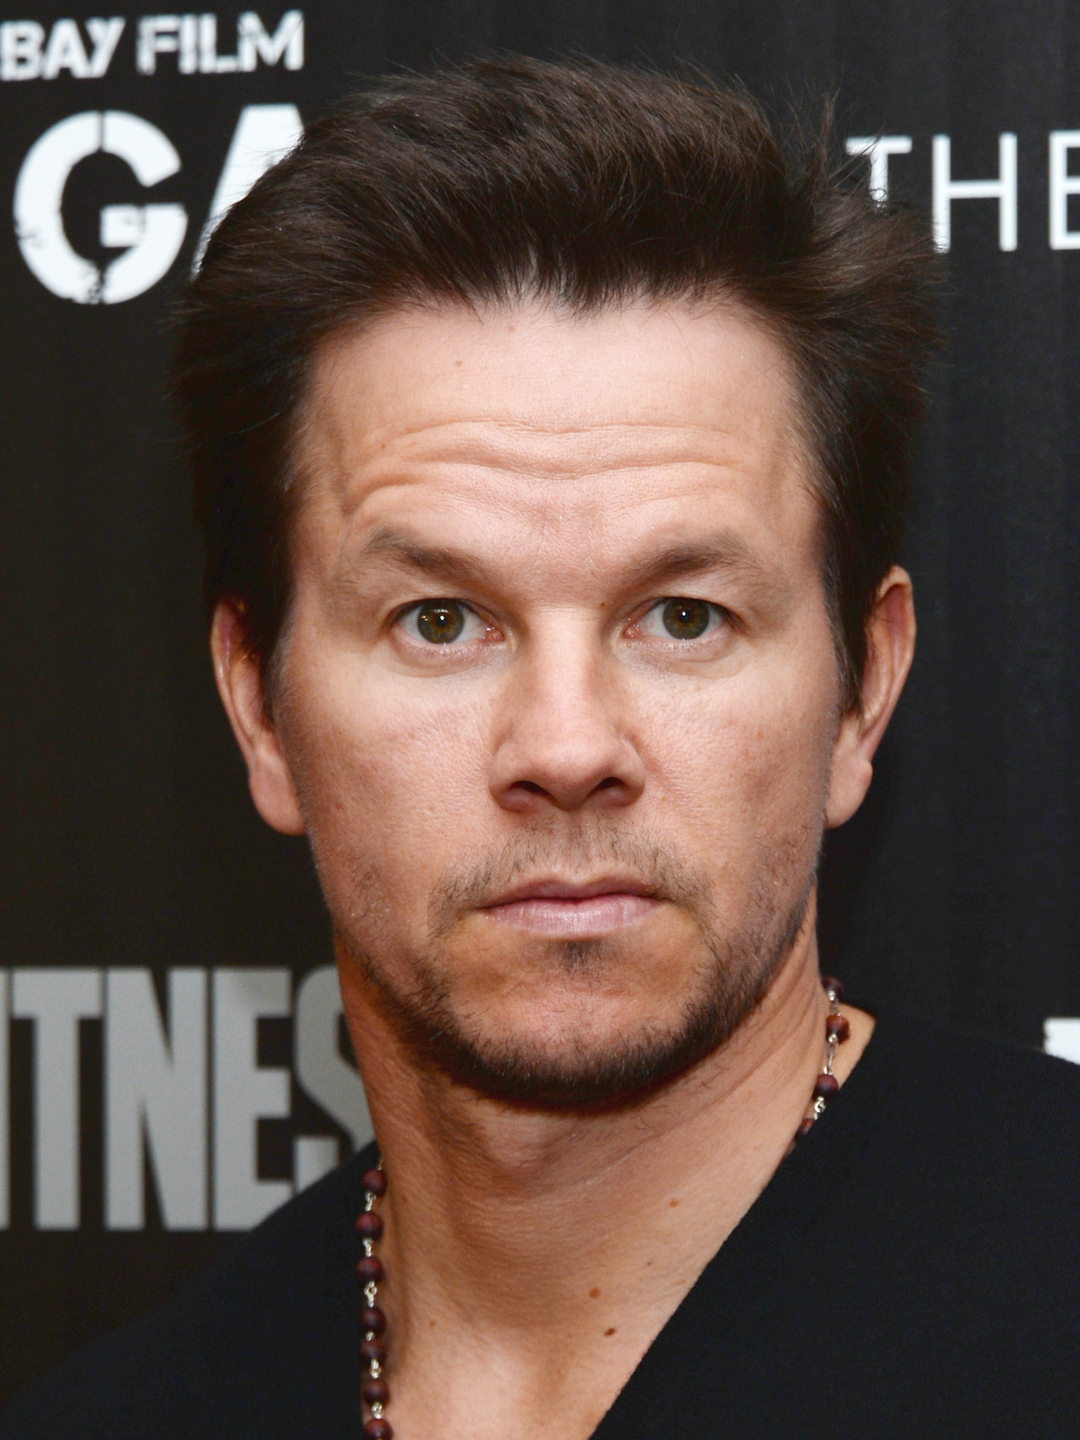 Mark Wahlberg how did he became famous